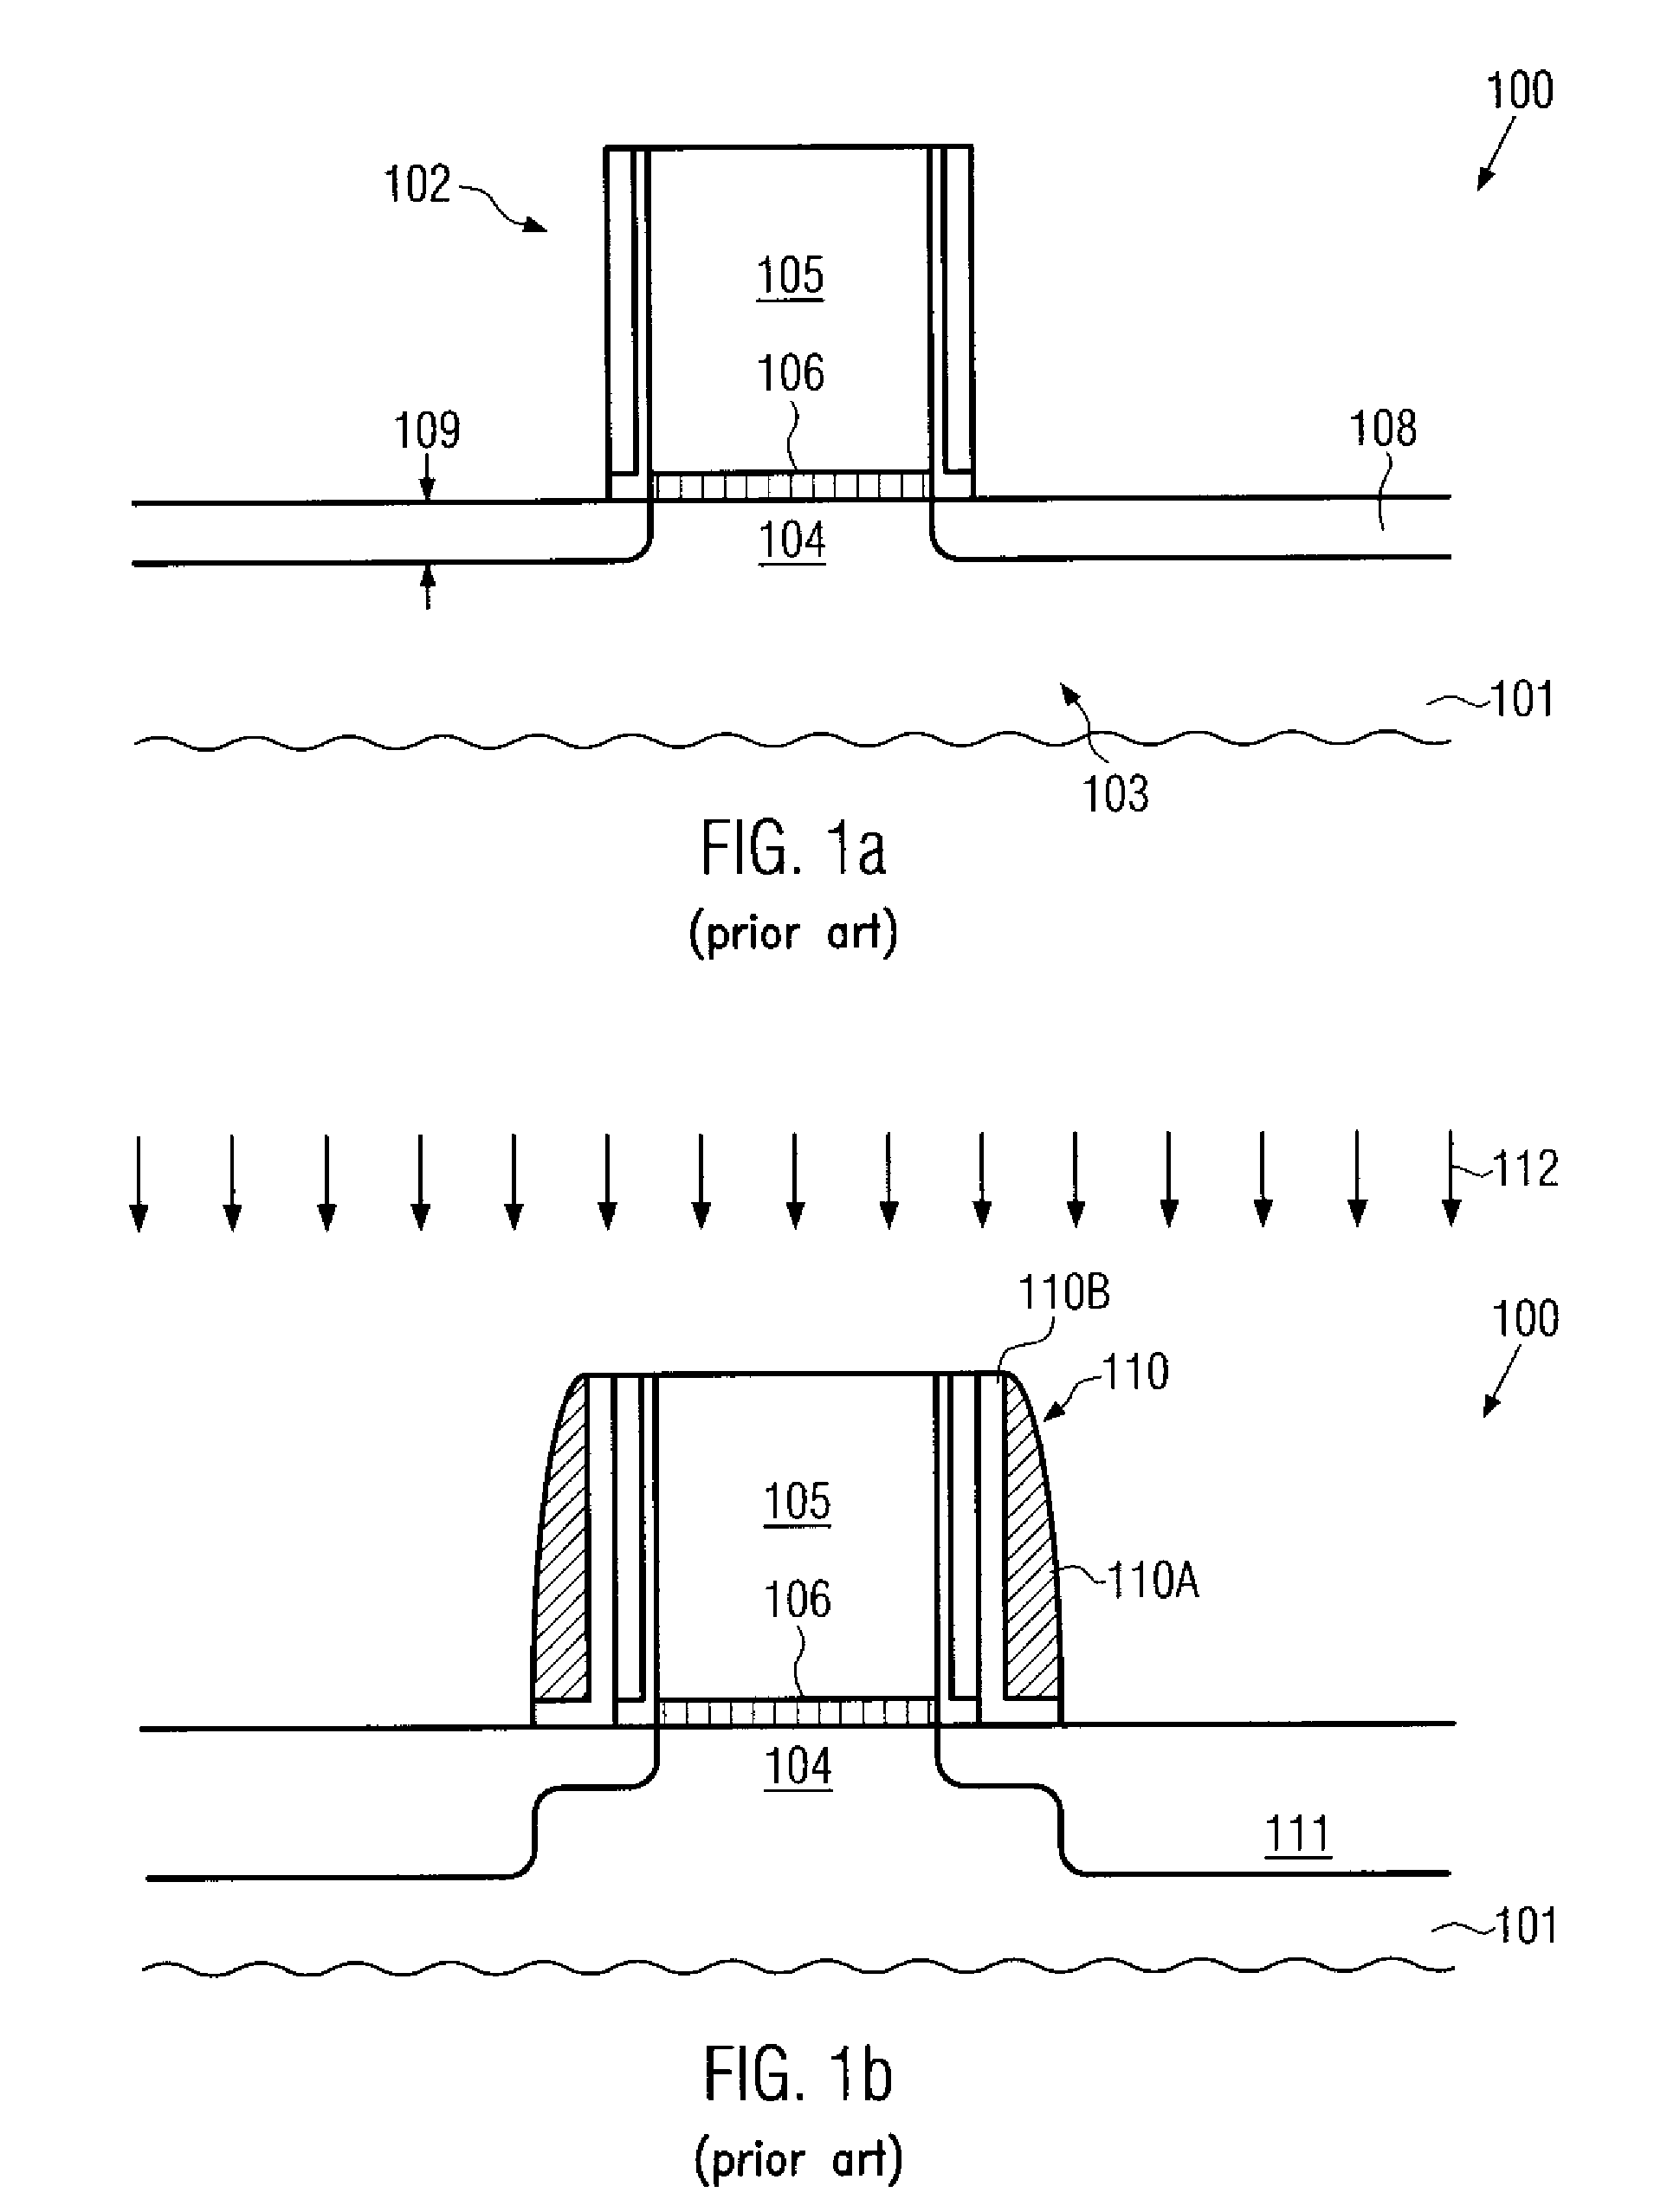 Drain/source extension structure of a field effect transistor with reduced boron diffusion